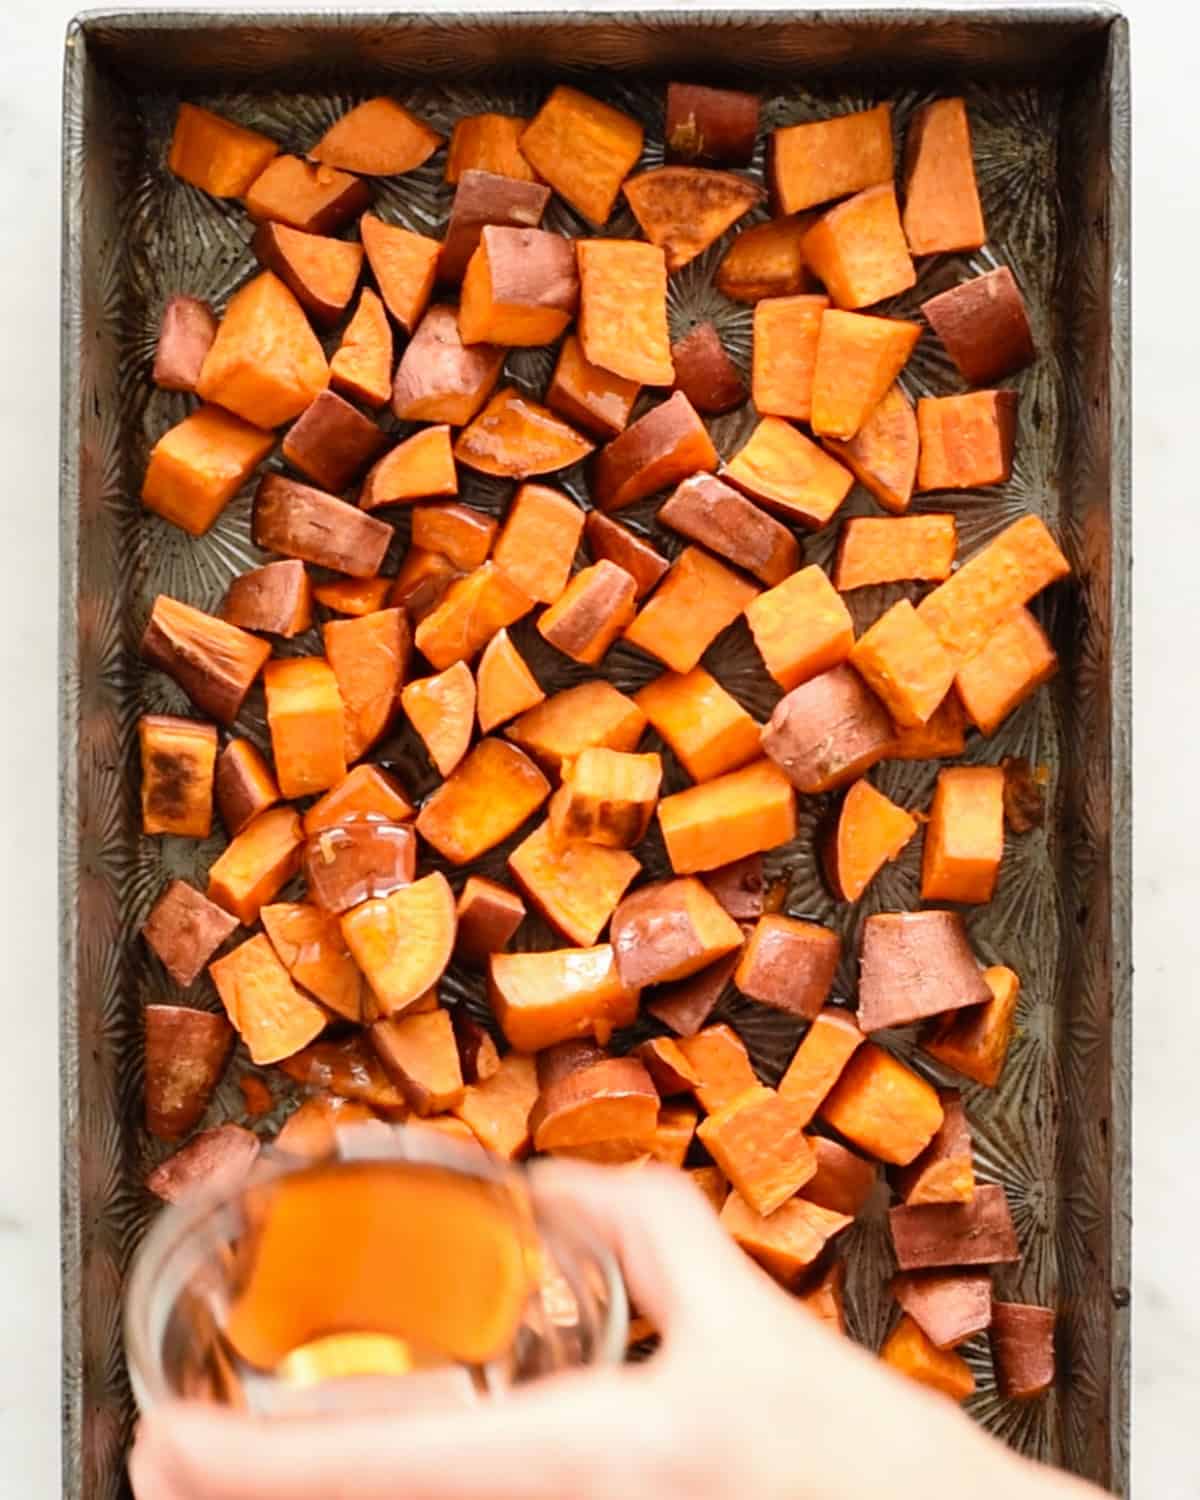 how to make Cinnamon Roasted Sweet Potatoes - adding maple syrup to partially roasted sweet potatoes